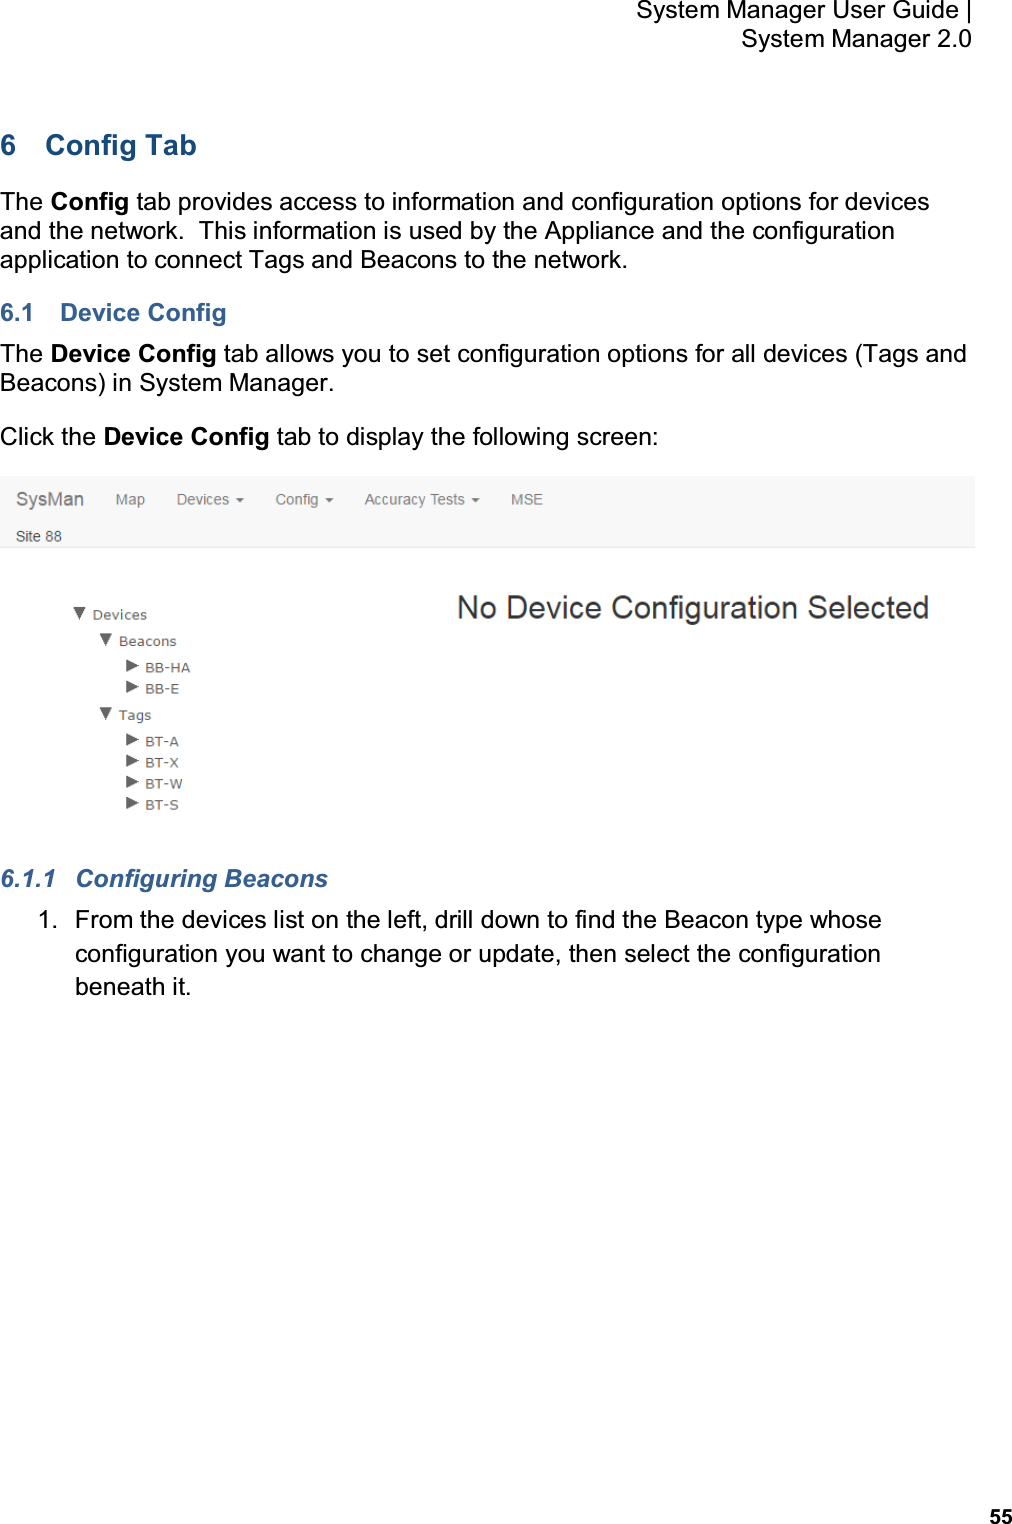           55 System Manager User Guide |  System Manager 2.0 6  Config Tab The Config tab provides access to information and configuration options for devices and the network.  This information is used by the Appliance and the configuration application to connect Tags and Beacons to the network. 6.1  Device Config The Device Config tab allows you to set configuration options for all devices (Tags and Beacons) in System Manager.   Click the Device Config tab to display the following screen:  6.1.1  Configuring Beacons 1.  From the devices list on the left, drill down to find the Beacon type whose configuration you want to change or update, then select the configuration beneath it. 